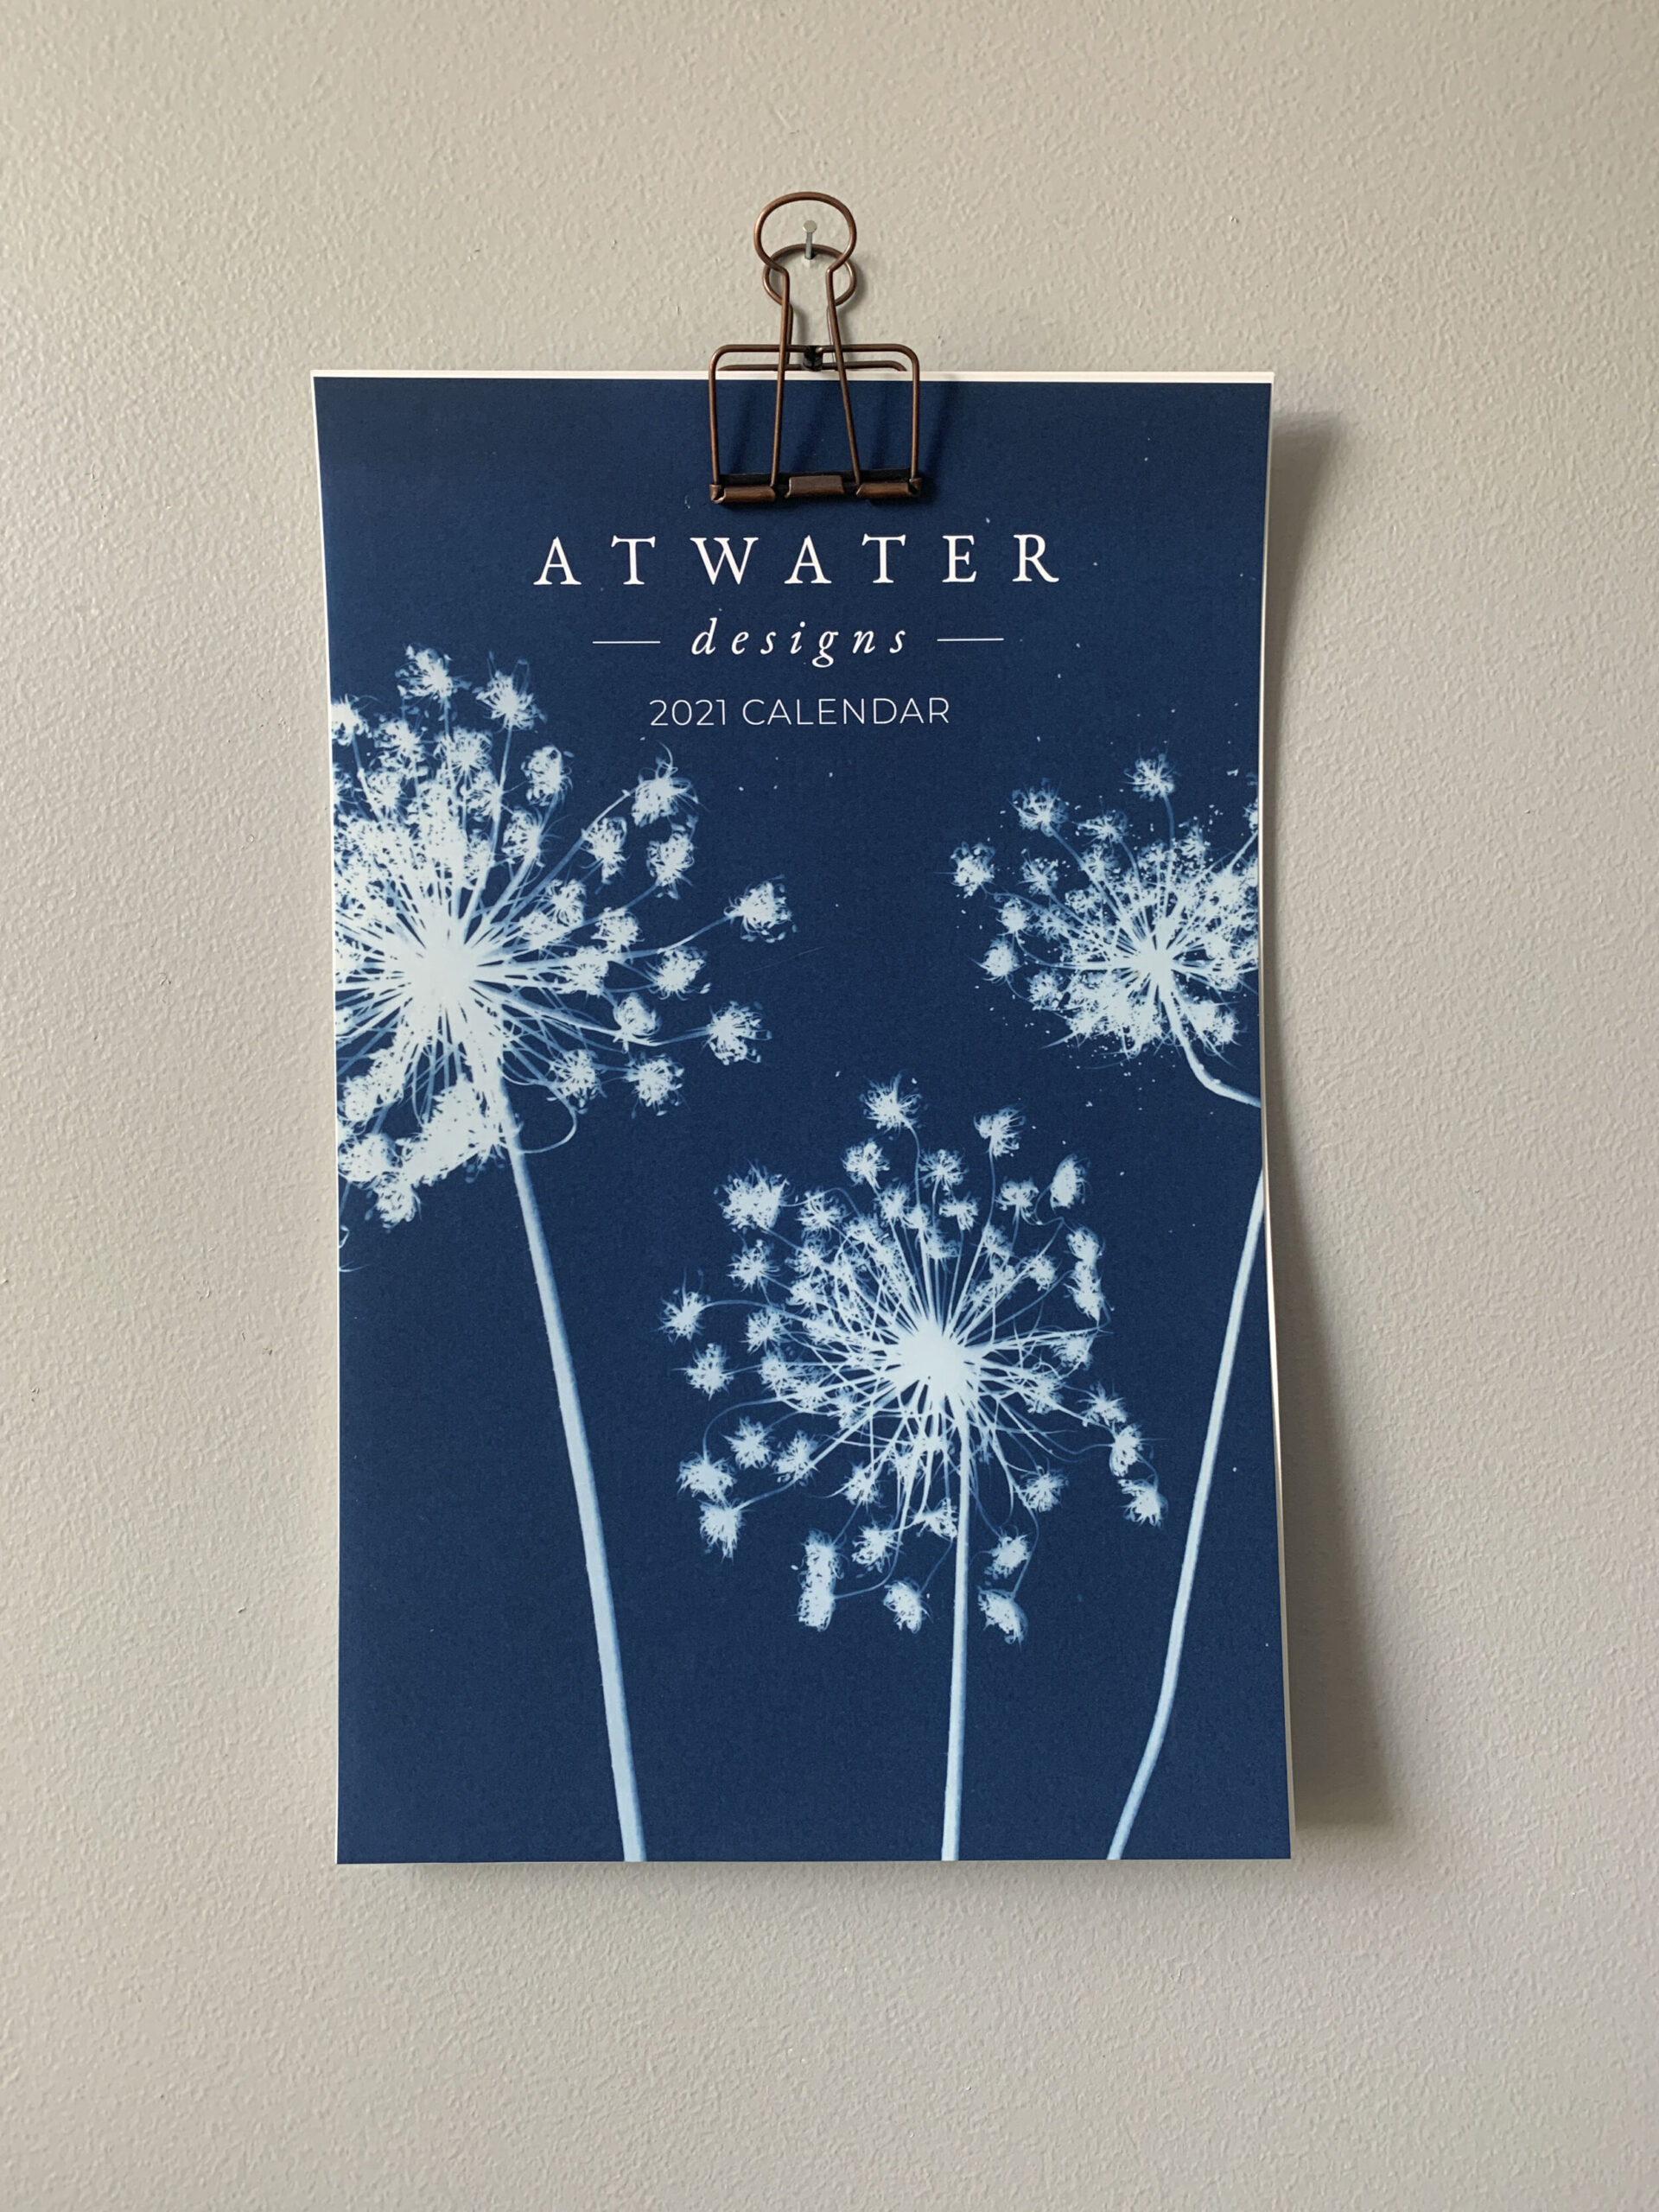 Atwater_Designs_2021_Calendar_how_to1.jpg